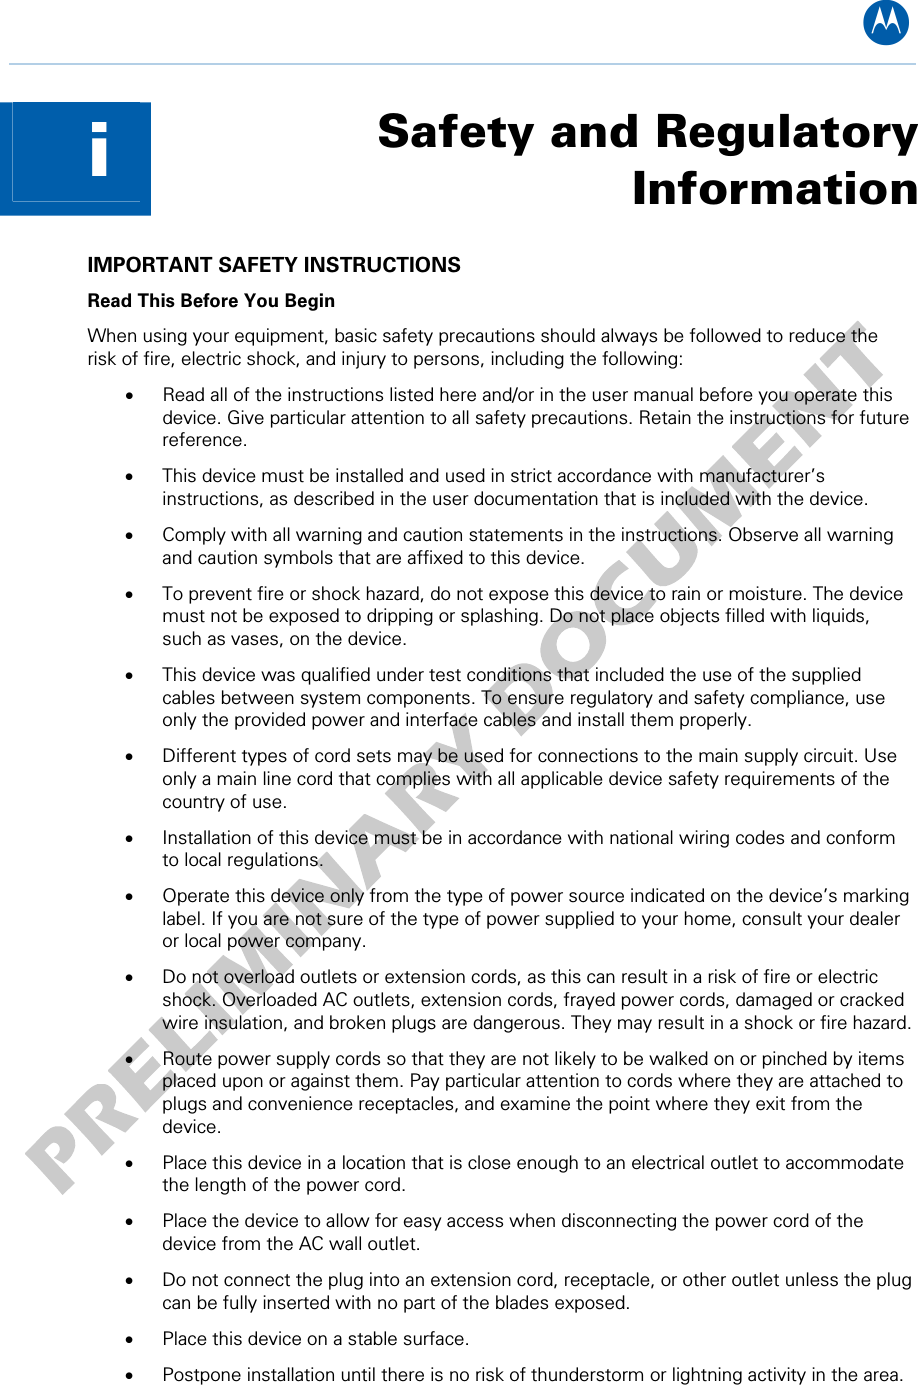 B Safety and Regulatory Informationi  IMPORTANT SAFETY INSTRUCTIONS  Read This Before You Begin When using your equipment, basic safety precautions should always be followed to reduce the risk of fire, electric shock, and injury to persons, including the following: • Read all of the instructions listed here and/or in the user manual before you operate this device. Give particular attention to all safety precautions. Retain the instructions for future reference. • This device must be installed and used in strict accordance with manufacturer’s instructions, as described in the user documentation that is included with the device. • Comply with all warning and caution statements in the instructions. Observe all warning and caution symbols that are affixed to this device. • To prevent fire or shock hazard, do not expose this device to rain or moisture. The device must not be exposed to dripping or splashing. Do not place objects filled with liquids, such as vases, on the device. • This device was qualified under test conditions that included the use of the supplied cables between system components. To ensure regulatory and safety compliance, use only the provided power and interface cables and install them properly.  • Different types of cord sets may be used for connections to the main supply circuit. Use only a main line cord that complies with all applicable device safety requirements of the country of use. • Installation of this device must be in accordance with national wiring codes and conform to local regulations. • Operate this device only from the type of power source indicated on the device’s marking label. If you are not sure of the type of power supplied to your home, consult your dealer or local power company. • Do not overload outlets or extension cords, as this can result in a risk of fire or electric shock. Overloaded AC outlets, extension cords, frayed power cords, damaged or cracked wire insulation, and broken plugs are dangerous. They may result in a shock or fire hazard. • Route power supply cords so that they are not likely to be walked on or pinched by items placed upon or against them. Pay particular attention to cords where they are attached to plugs and convenience receptacles, and examine the point where they exit from the device. • Place this device in a location that is close enough to an electrical outlet to accommodate the length of the power cord. • Place the device to allow for easy access when disconnecting the power cord of the device from the AC wall outlet. • Do not connect the plug into an extension cord, receptacle, or other outlet unless the plug can be fully inserted with no part of the blades exposed. • Place this device on a stable surface. • Postpone installation until there is no risk of thunderstorm or lightning activity in the area. i • Safety and Regulatory Information 1   